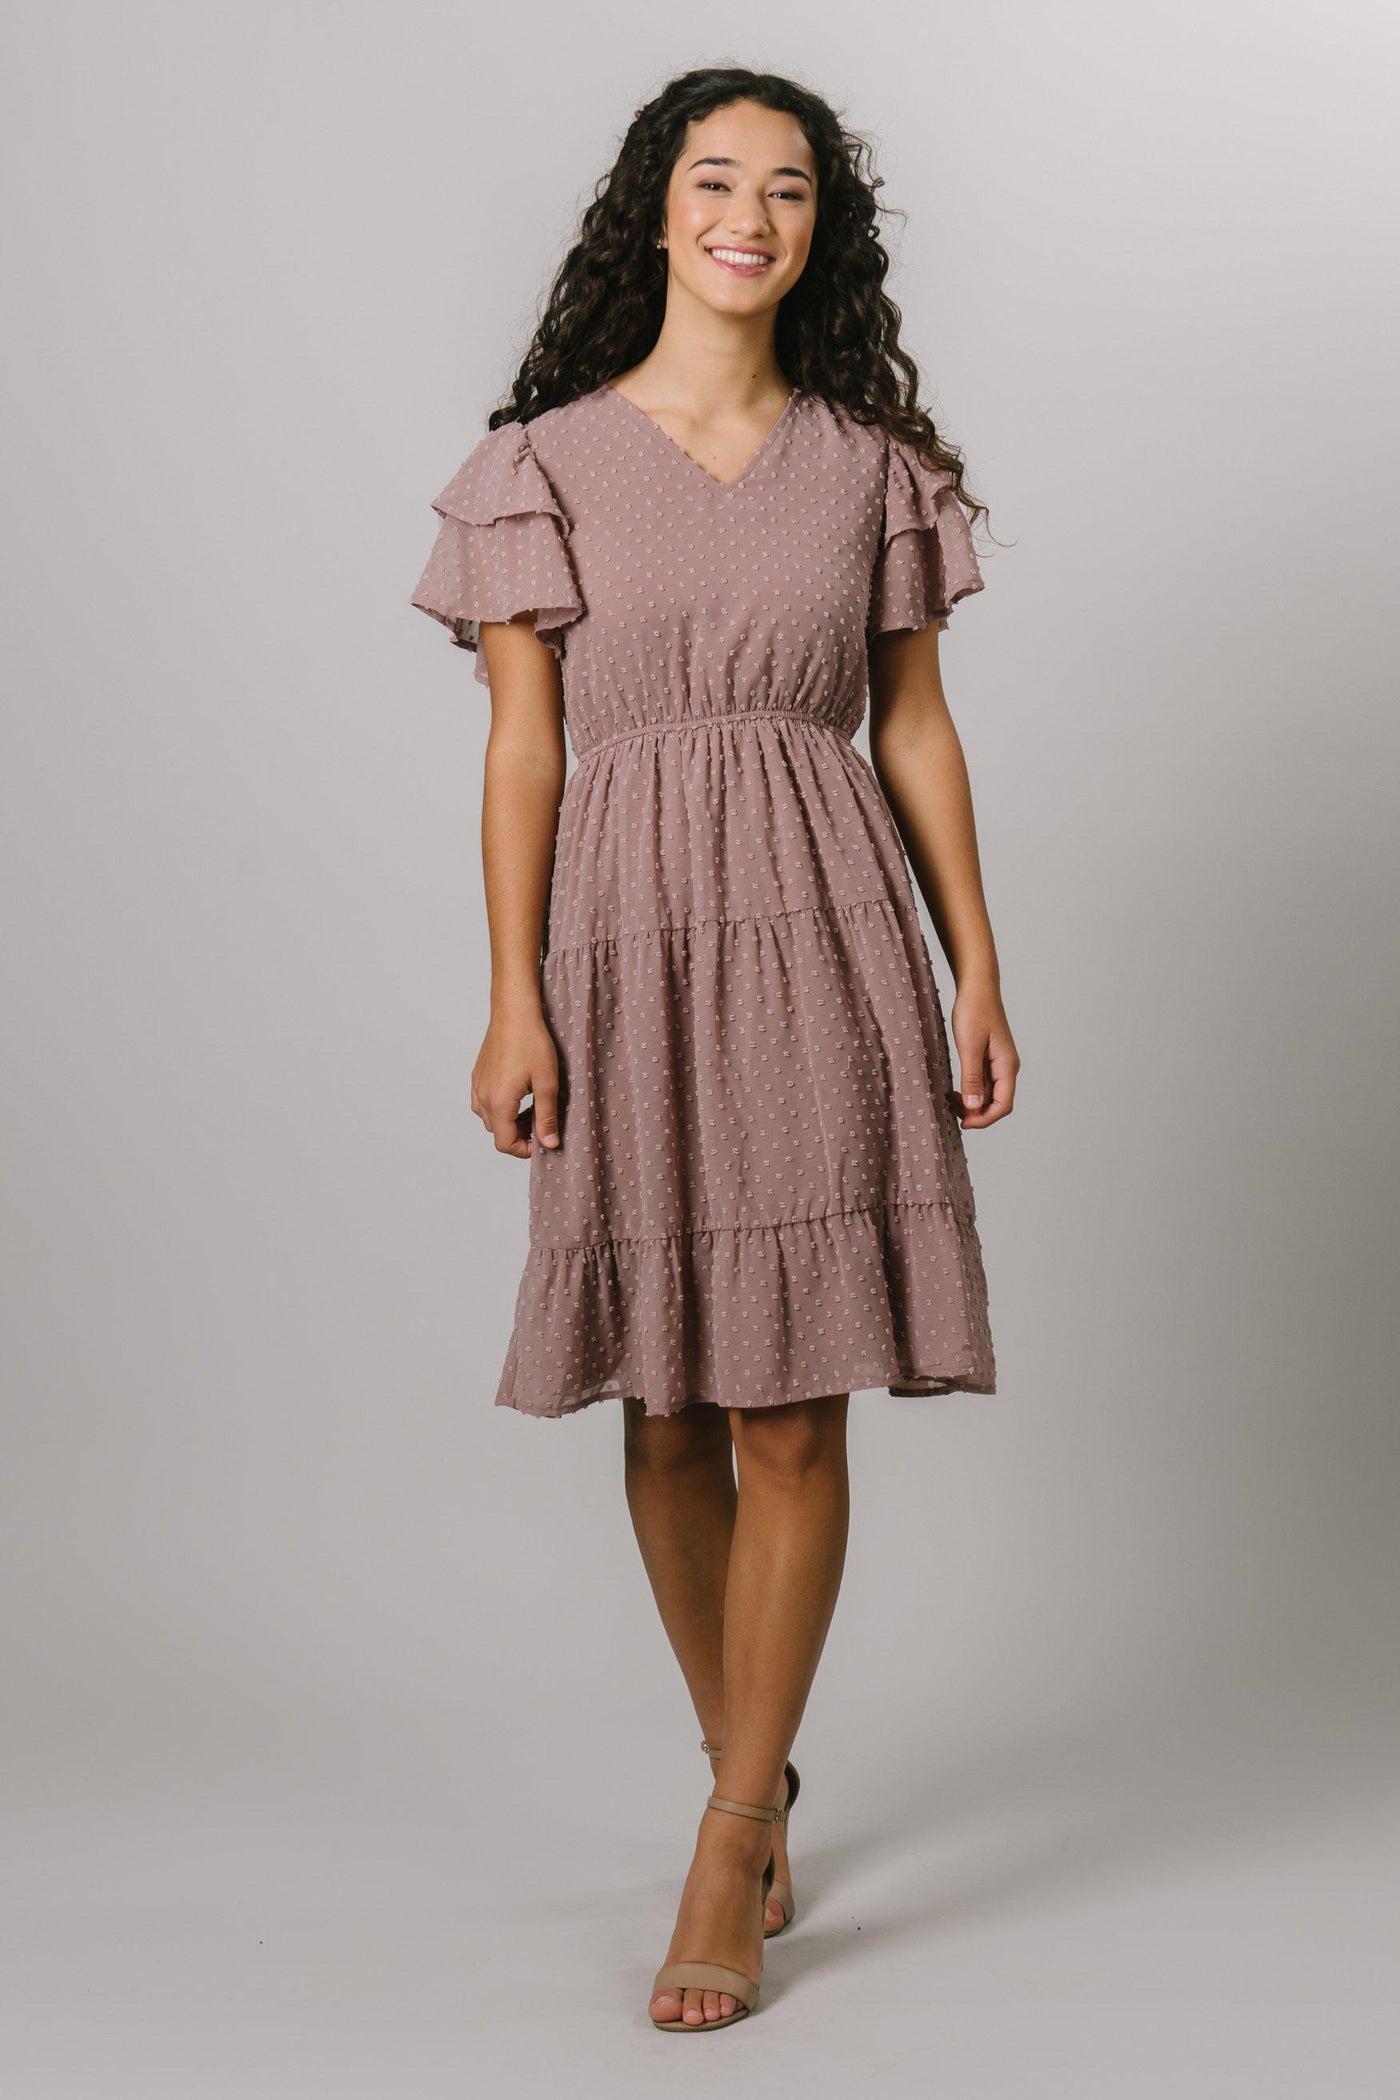 Modest Dresses - Modest Clothing - Everyday Modest Dresses - Bridesmaid Modest Dresses.  This dress is in the color woodrose. The dress features a swiss dot fabric, it is a knee length dress with panels. 